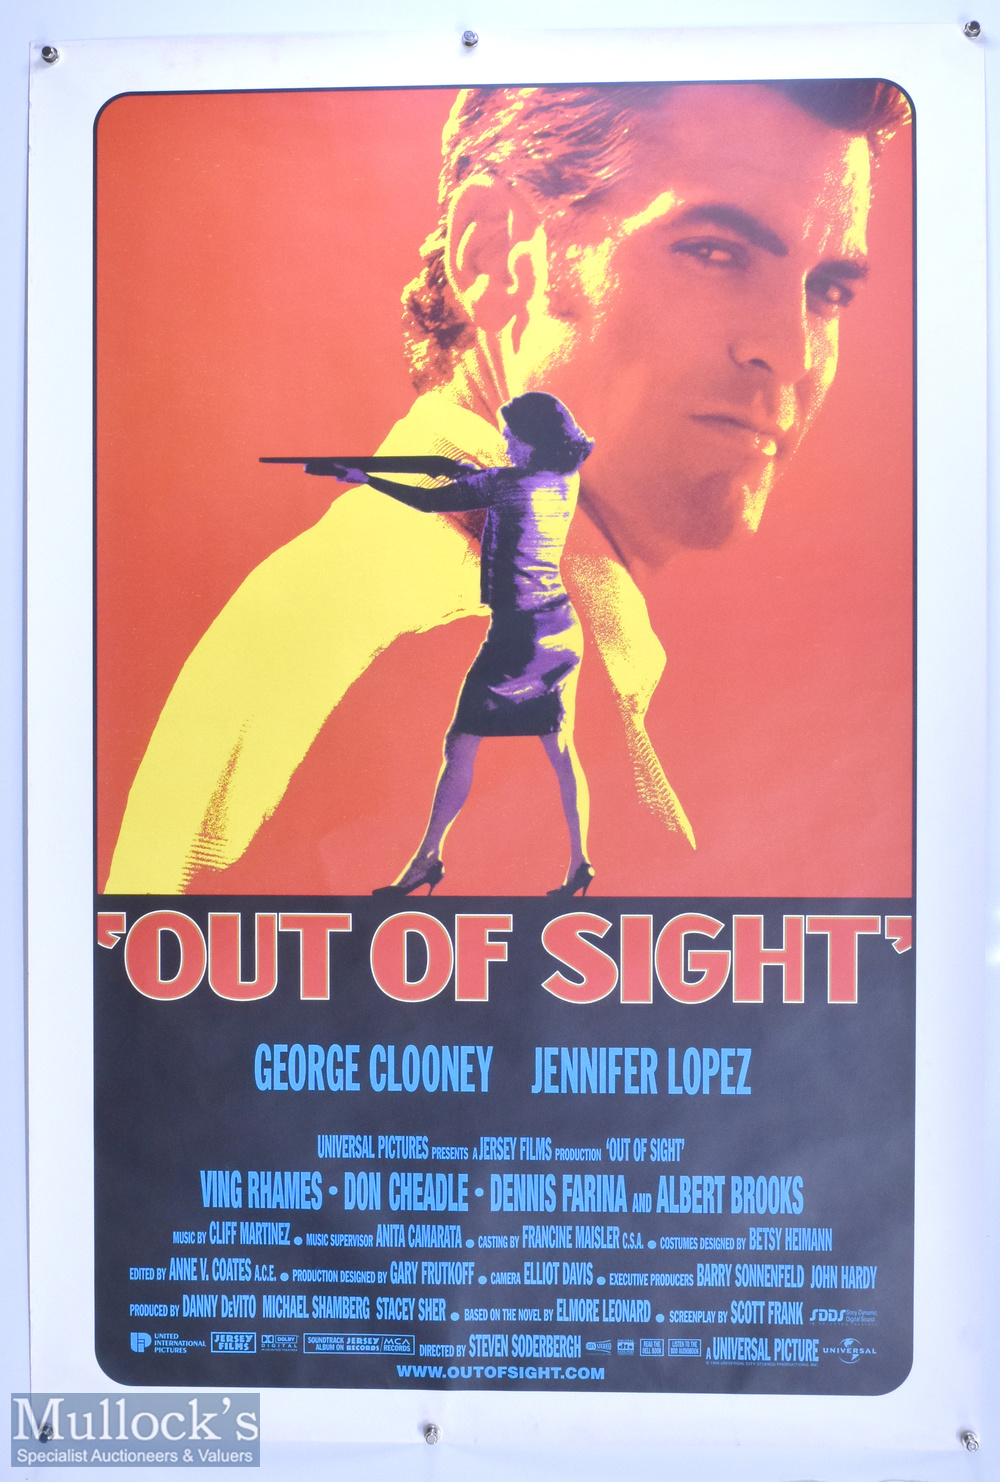 Original Movie/Film Poster - 1998 Out of Sight 27x40" approx., George Clooney, kept rolled, light